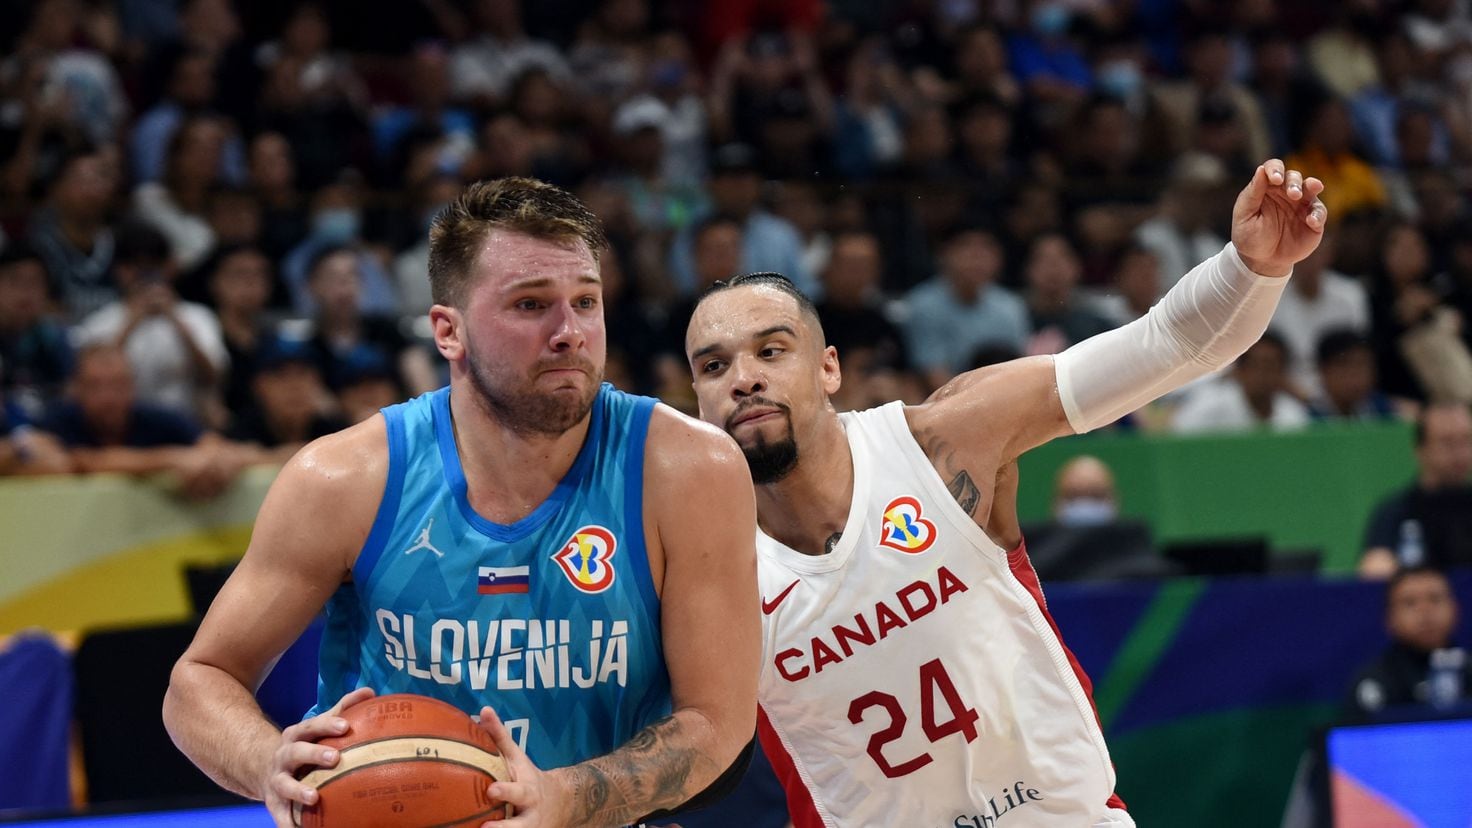 Dillon Brooks claims to be the best defender in the world after limiting Luka Doncic